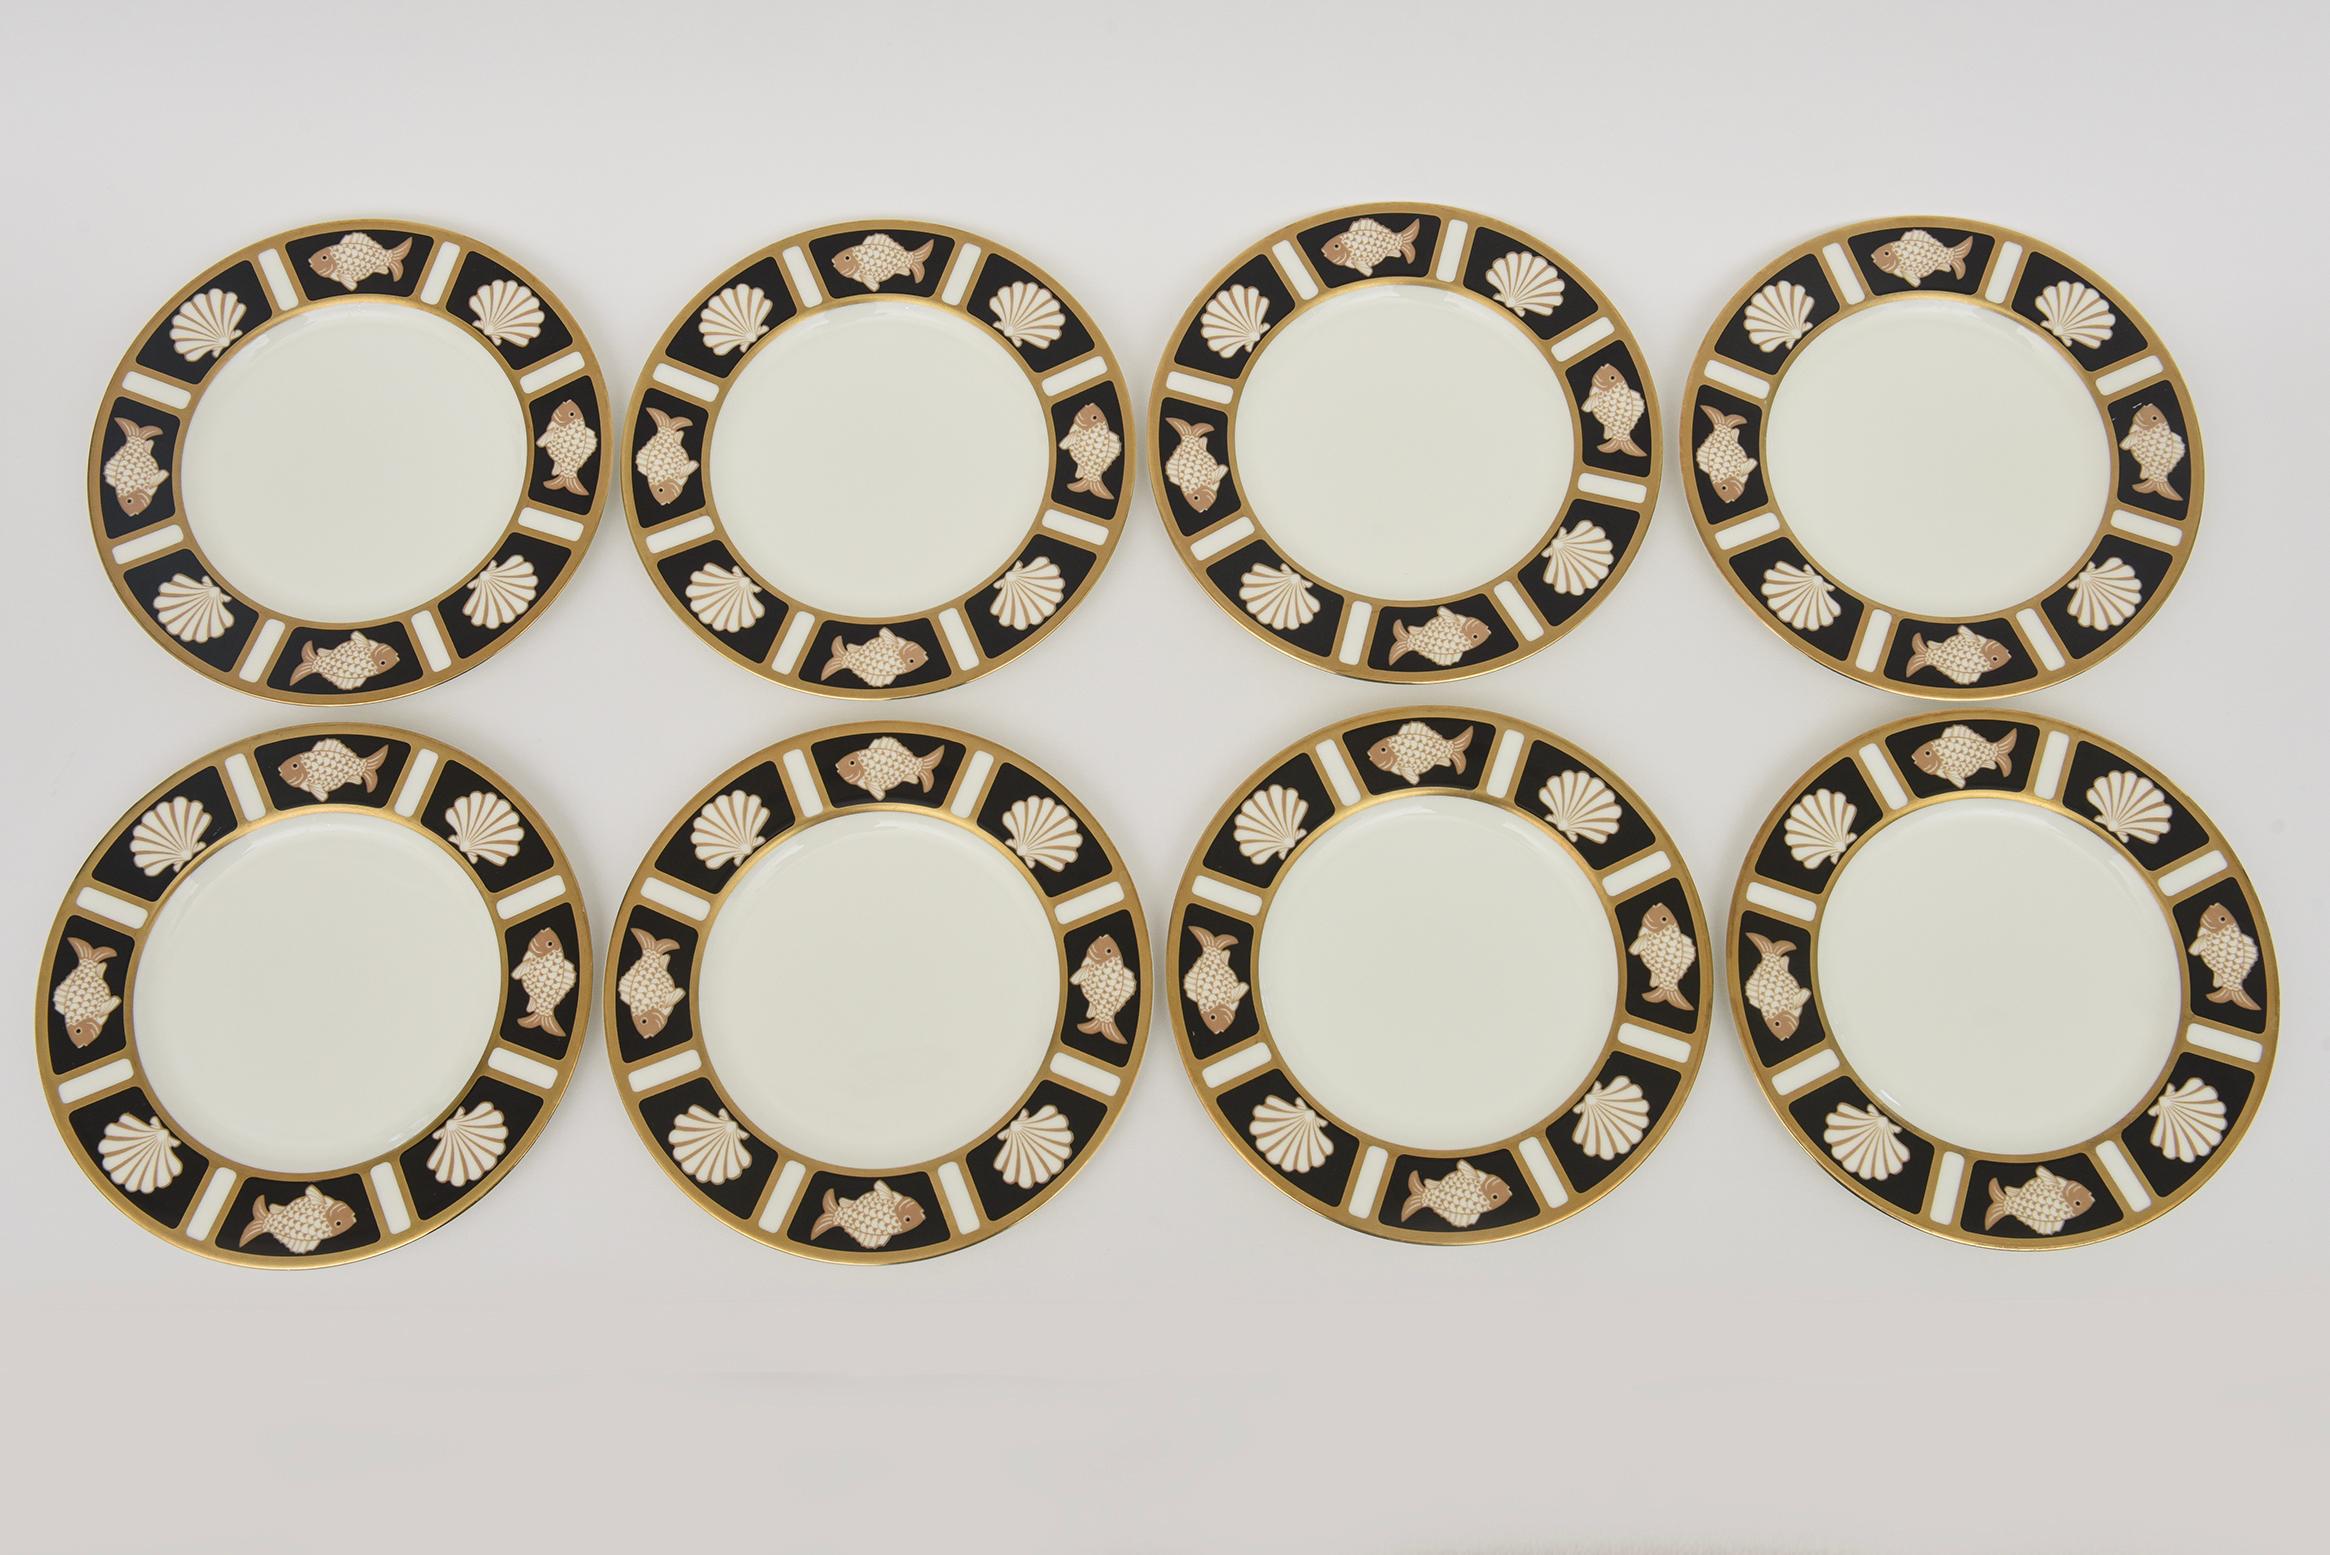 This lovely and elegant set of bone vintage serving, appetizer or salad plates are by Narumi Porcelain Co. from Japan. The design motif are alternating images of shell and fish. The are a set of 8. From the 60;s. The colors are white, tan and black.